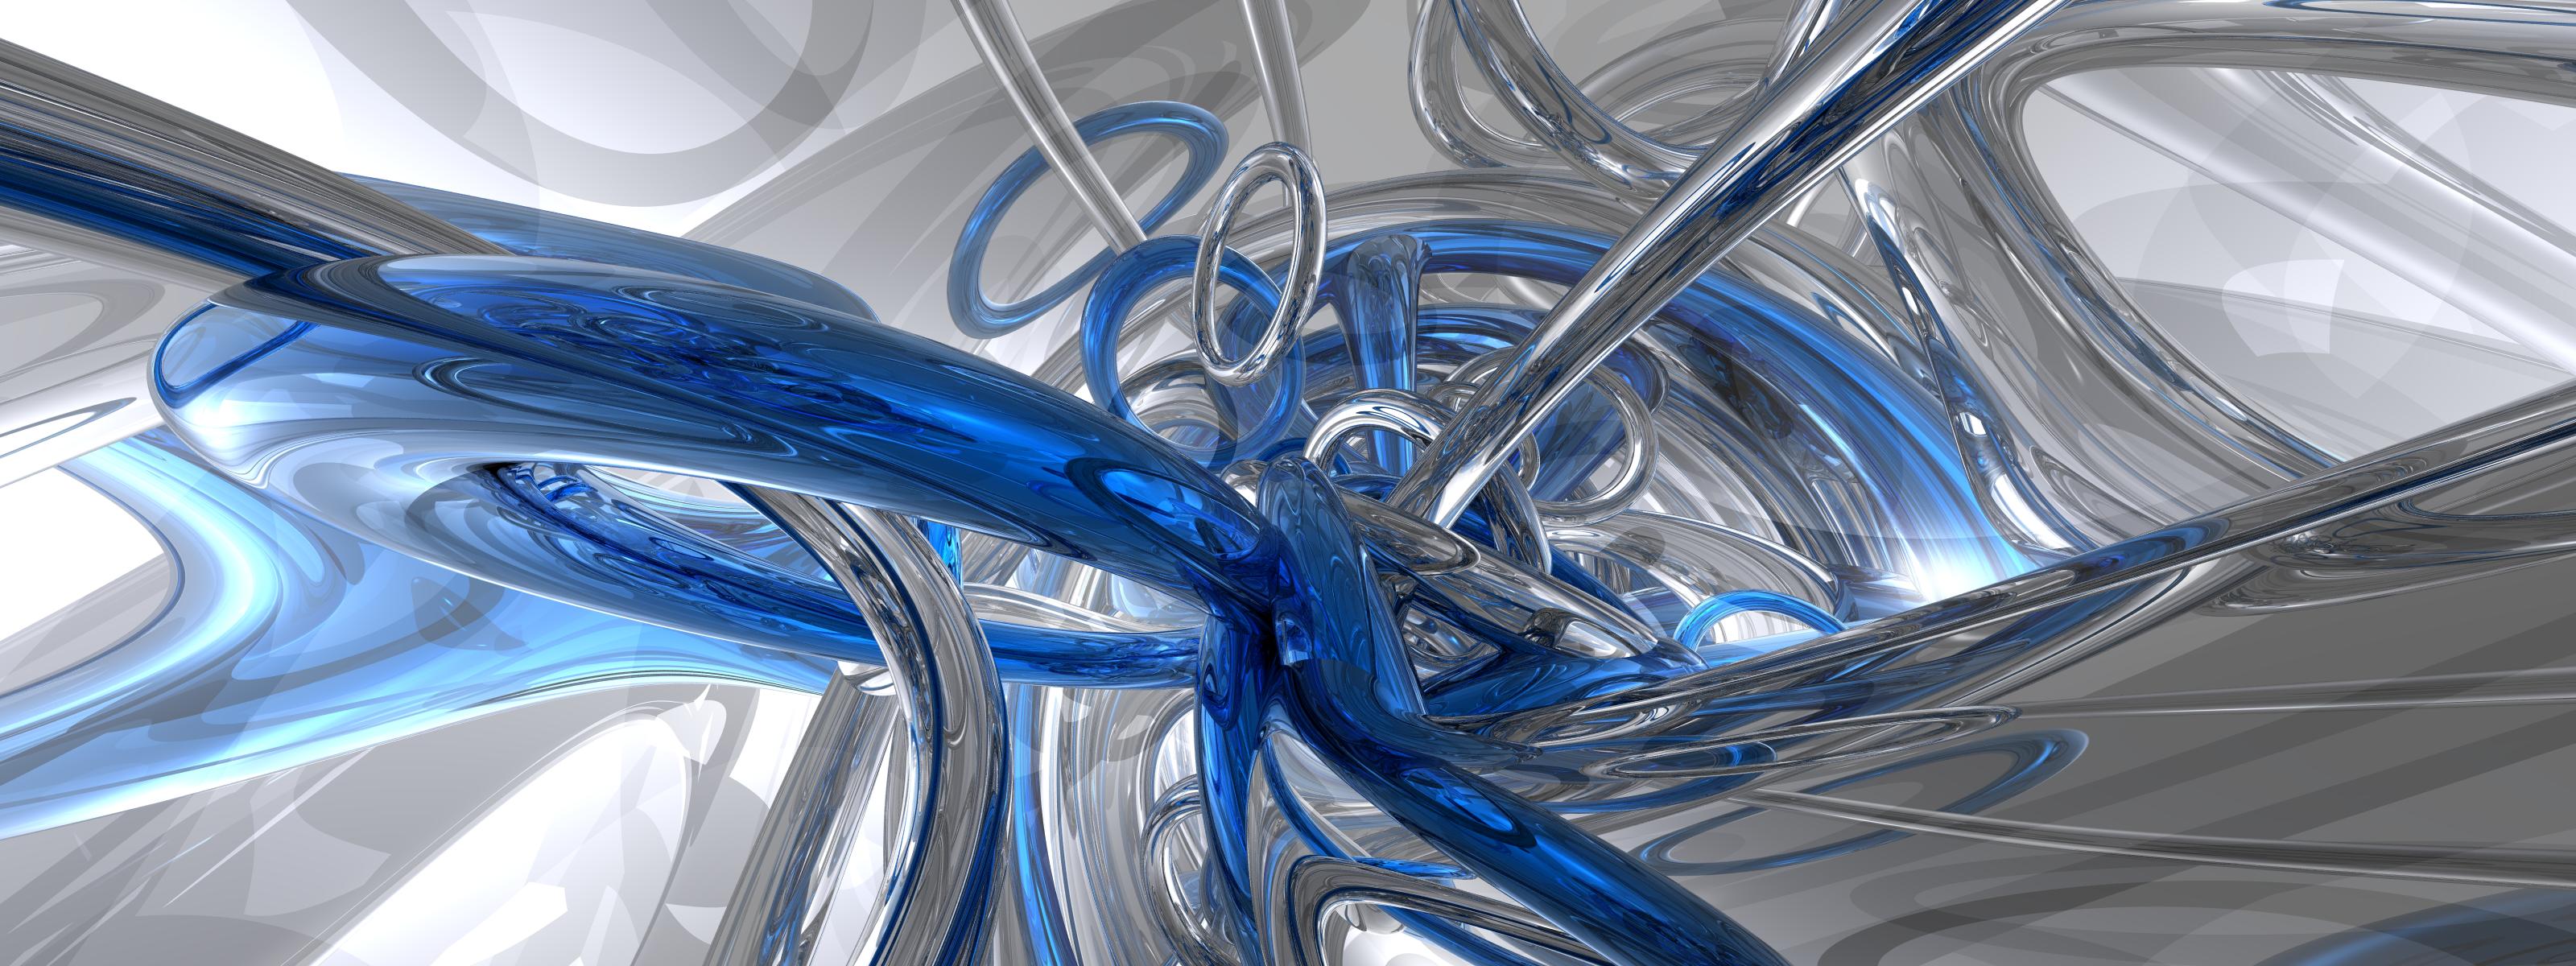 Abstract Blue Silver Wallpaper Hq